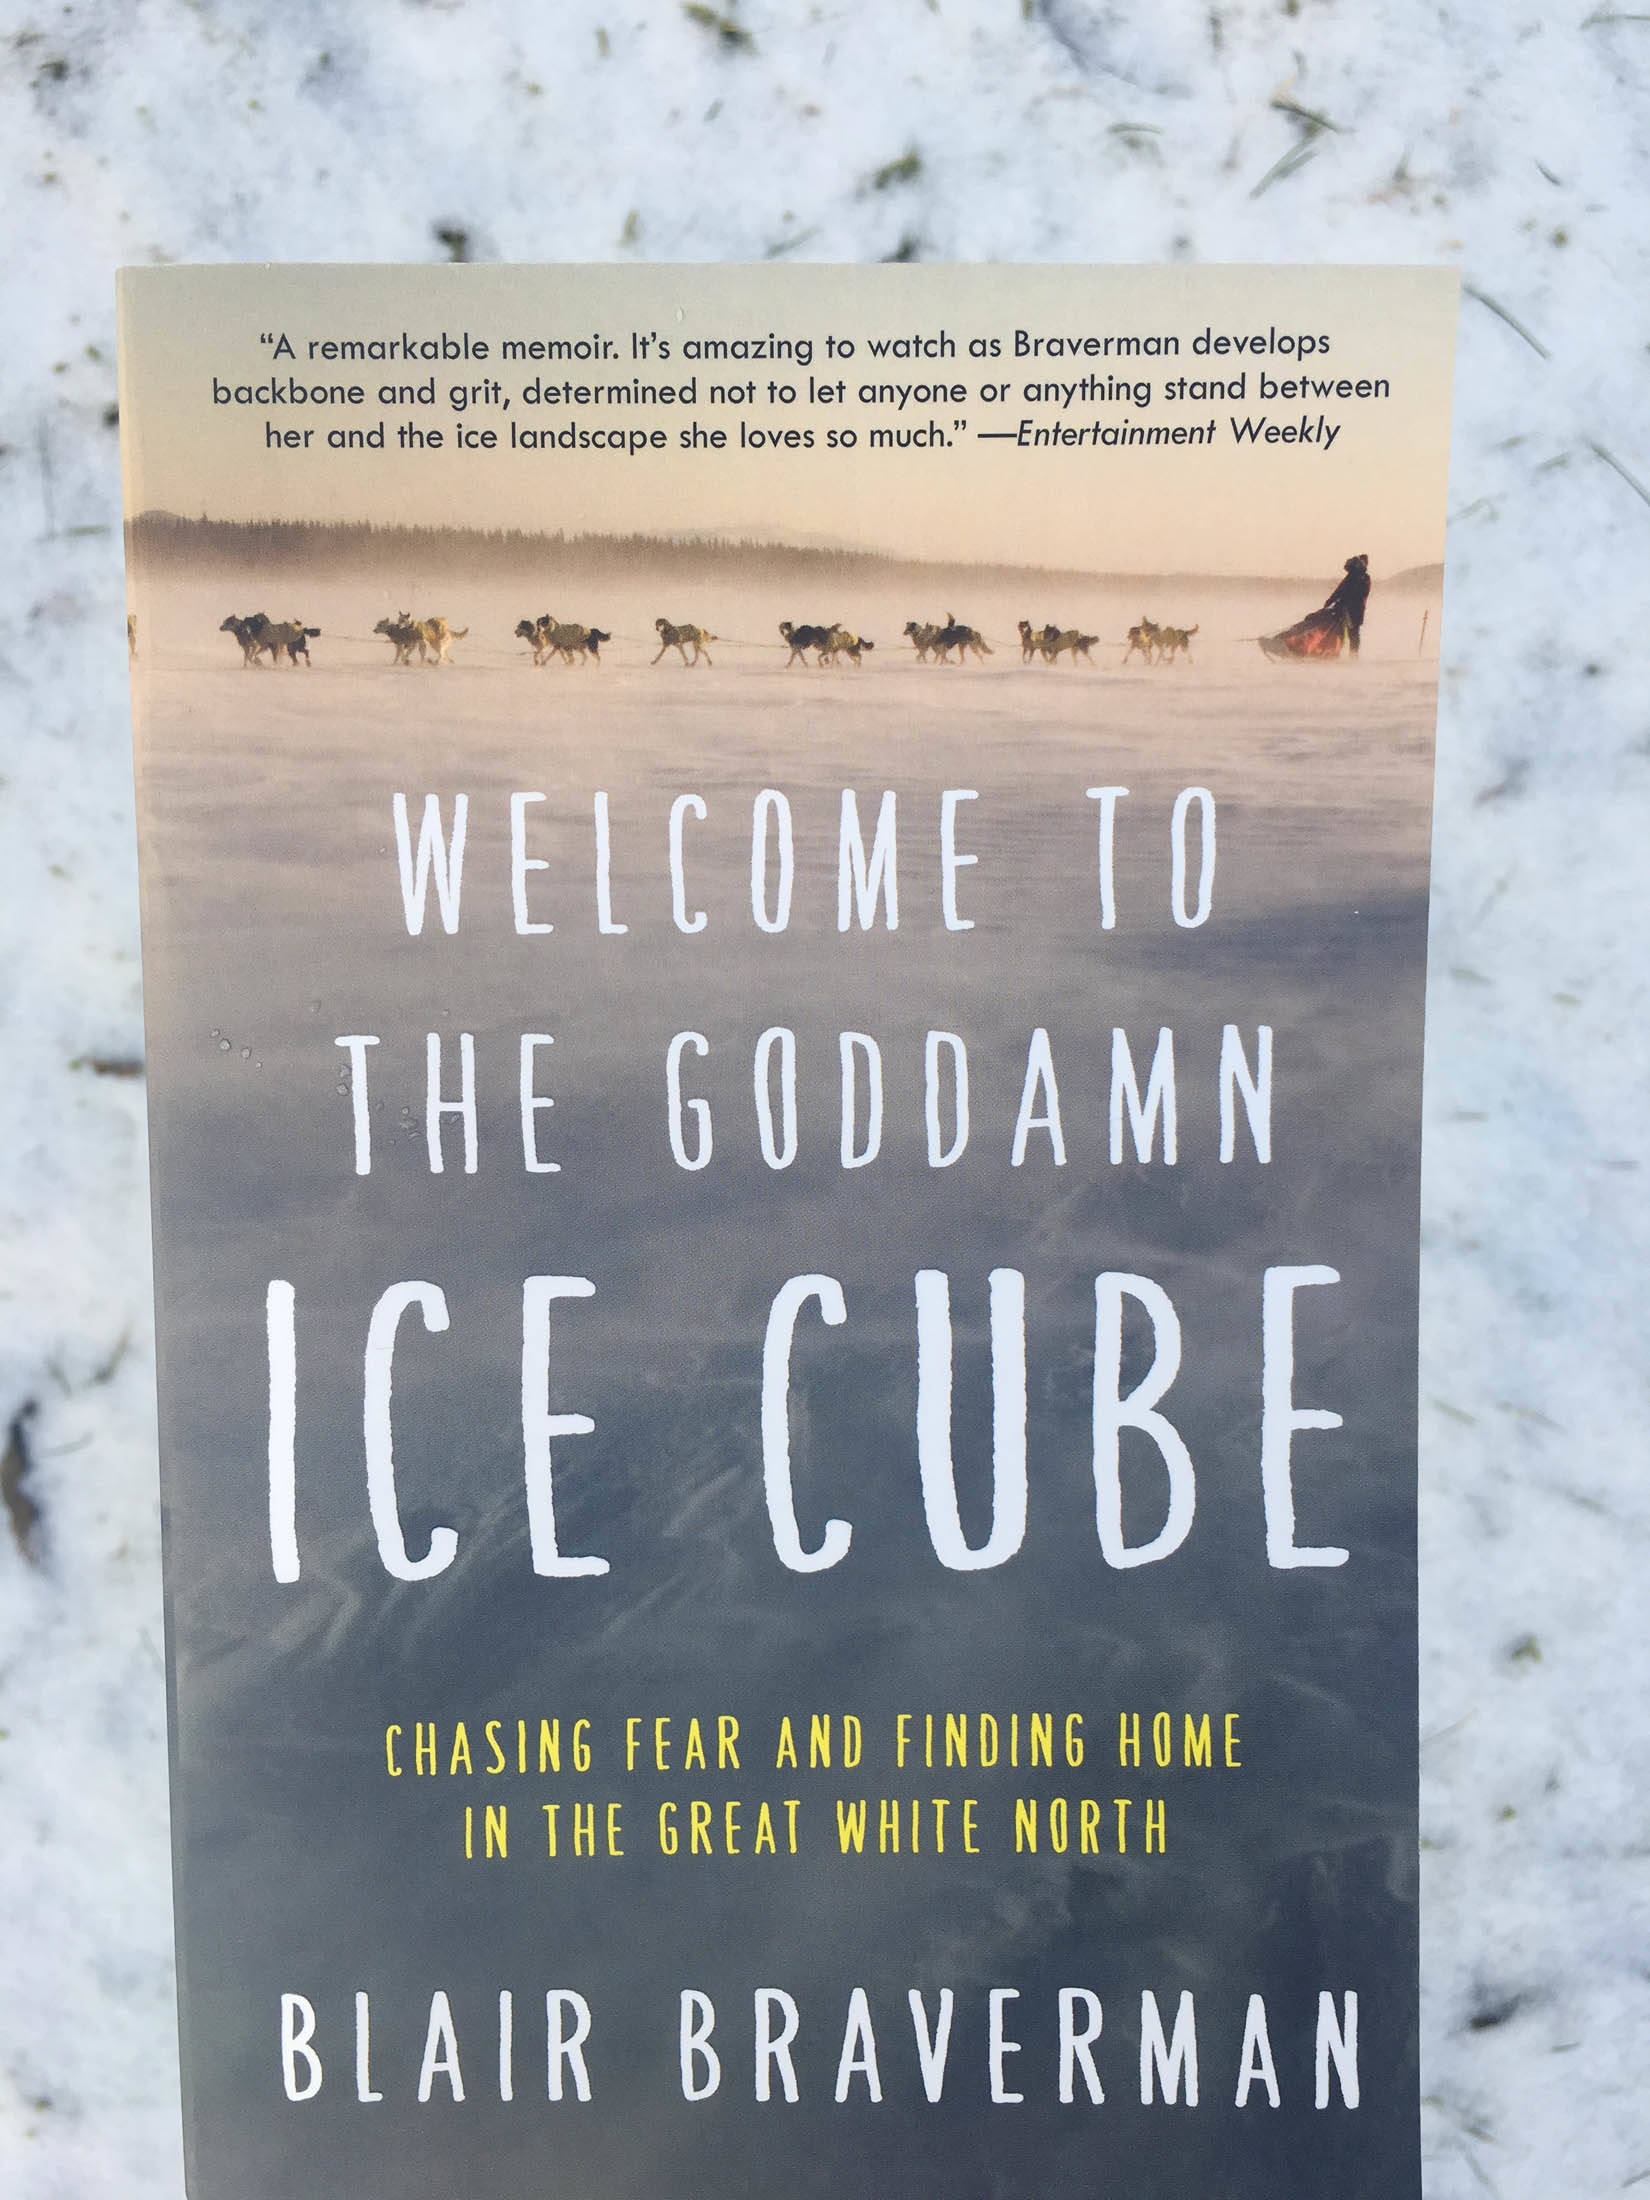 The Awesome Alaska Book Review: Blair Braverman cracks open an ‘Ice Cube’